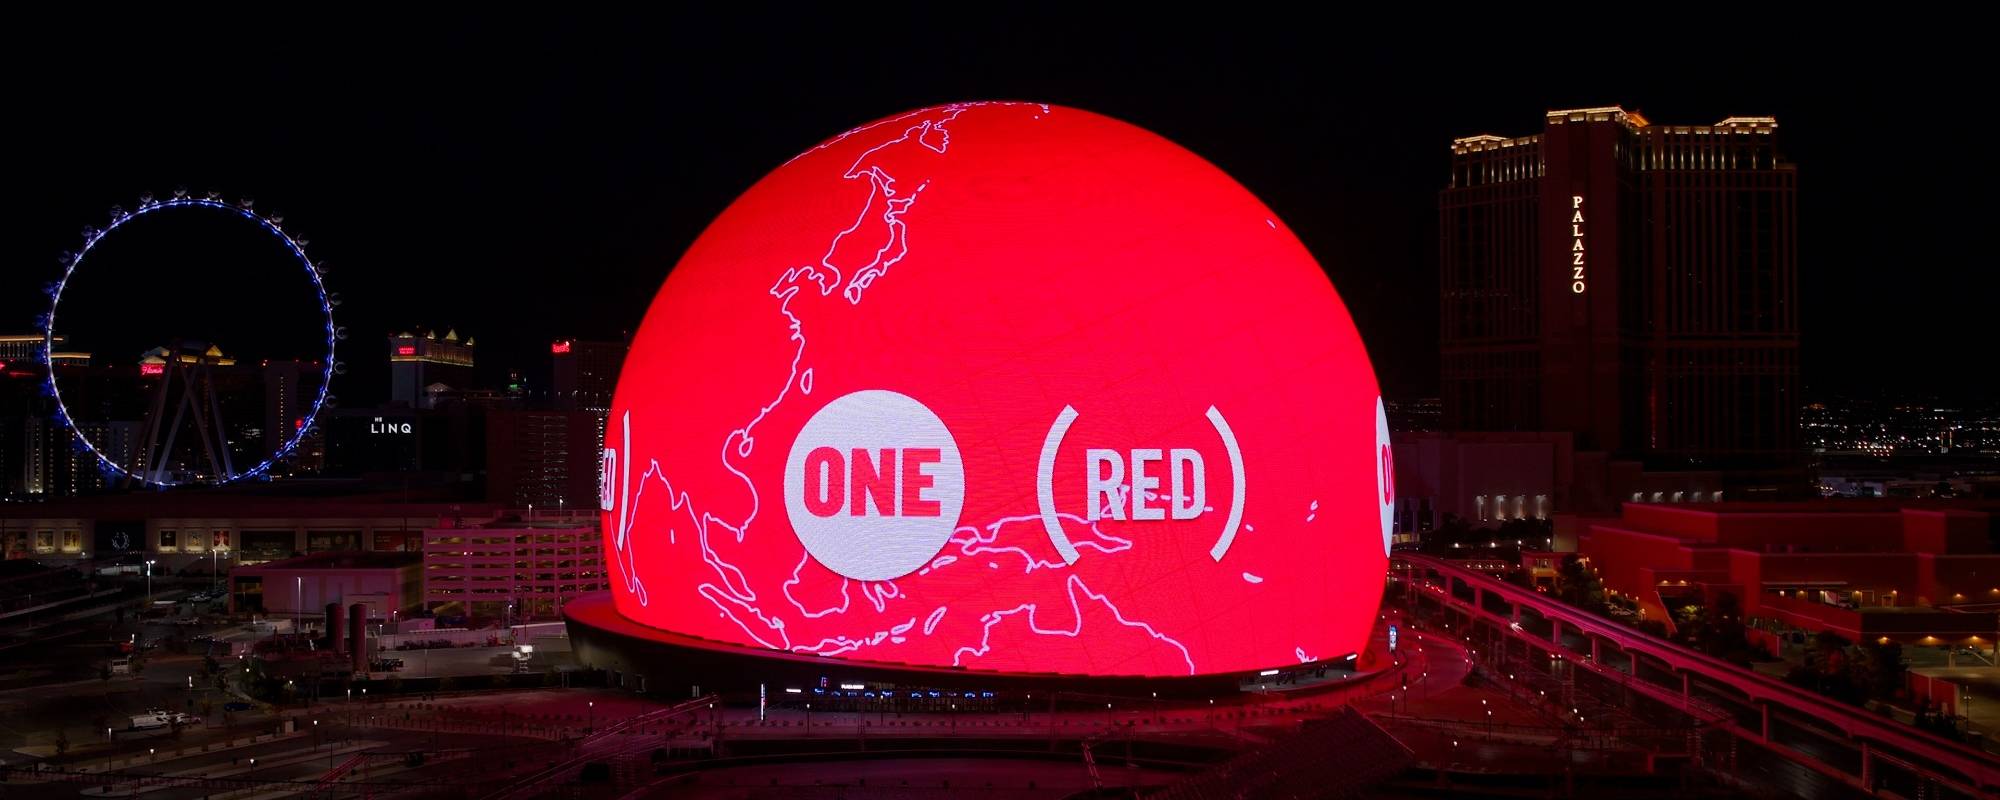 U2 Lighting Up Las Vegas’ Sphere Red Today in Honor of World AIDS Day and Bono’s (RED) Initiative